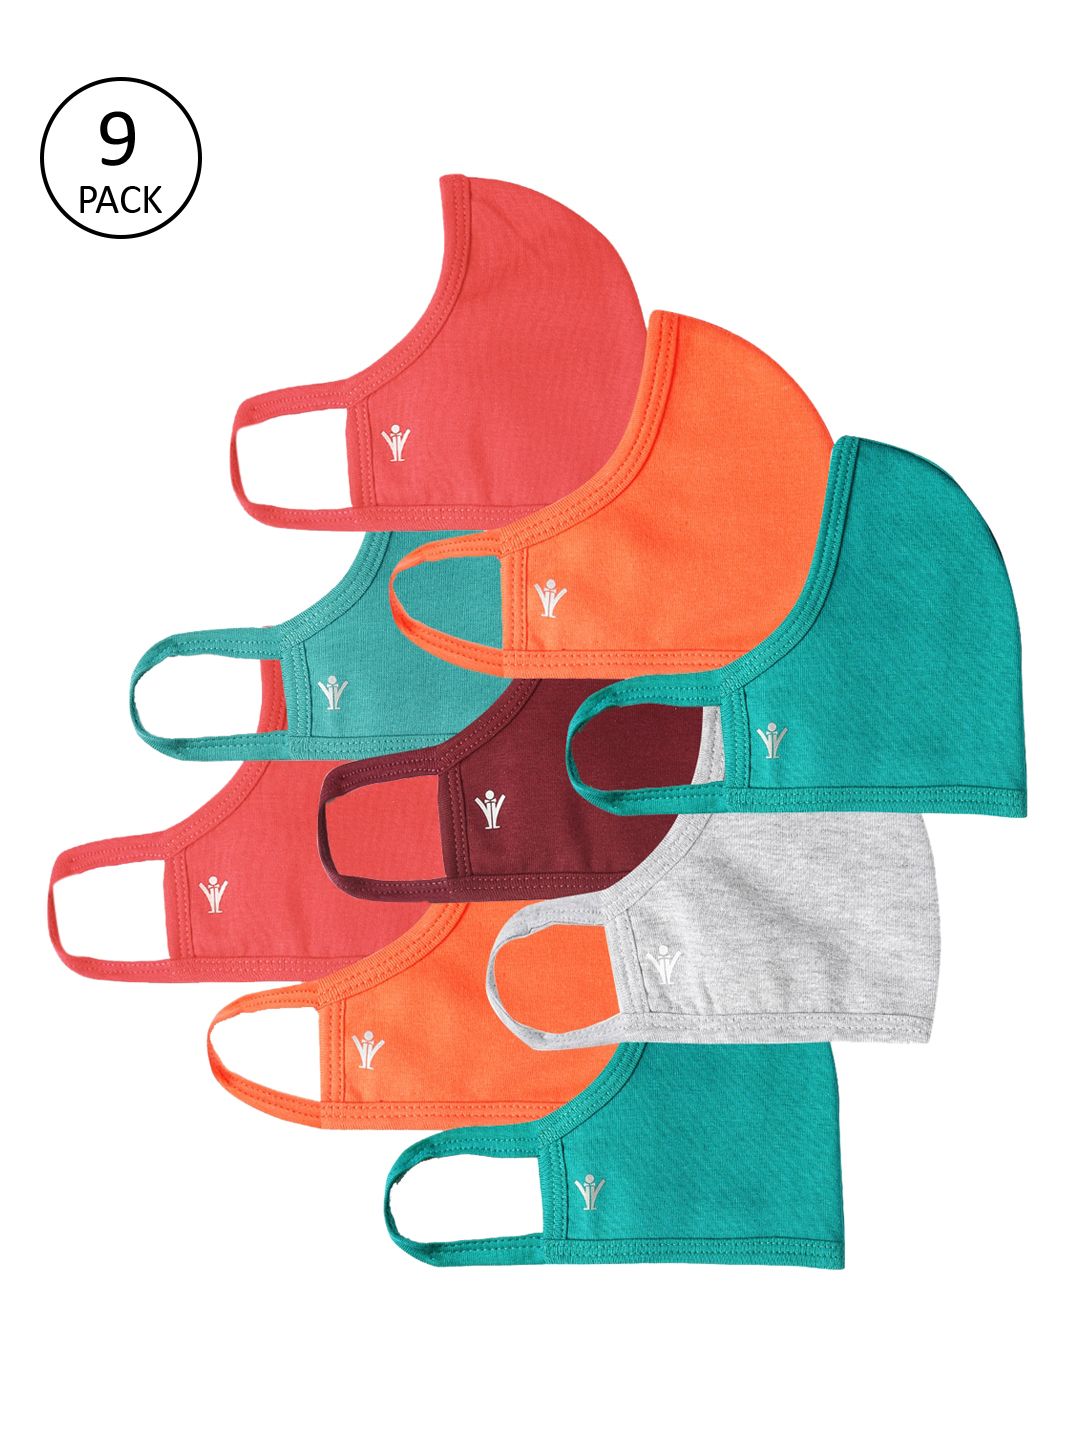 Ramraj Pack Of 9 Assorted 3-Ply Flexible Reusable Cloth Face Masks Price in India